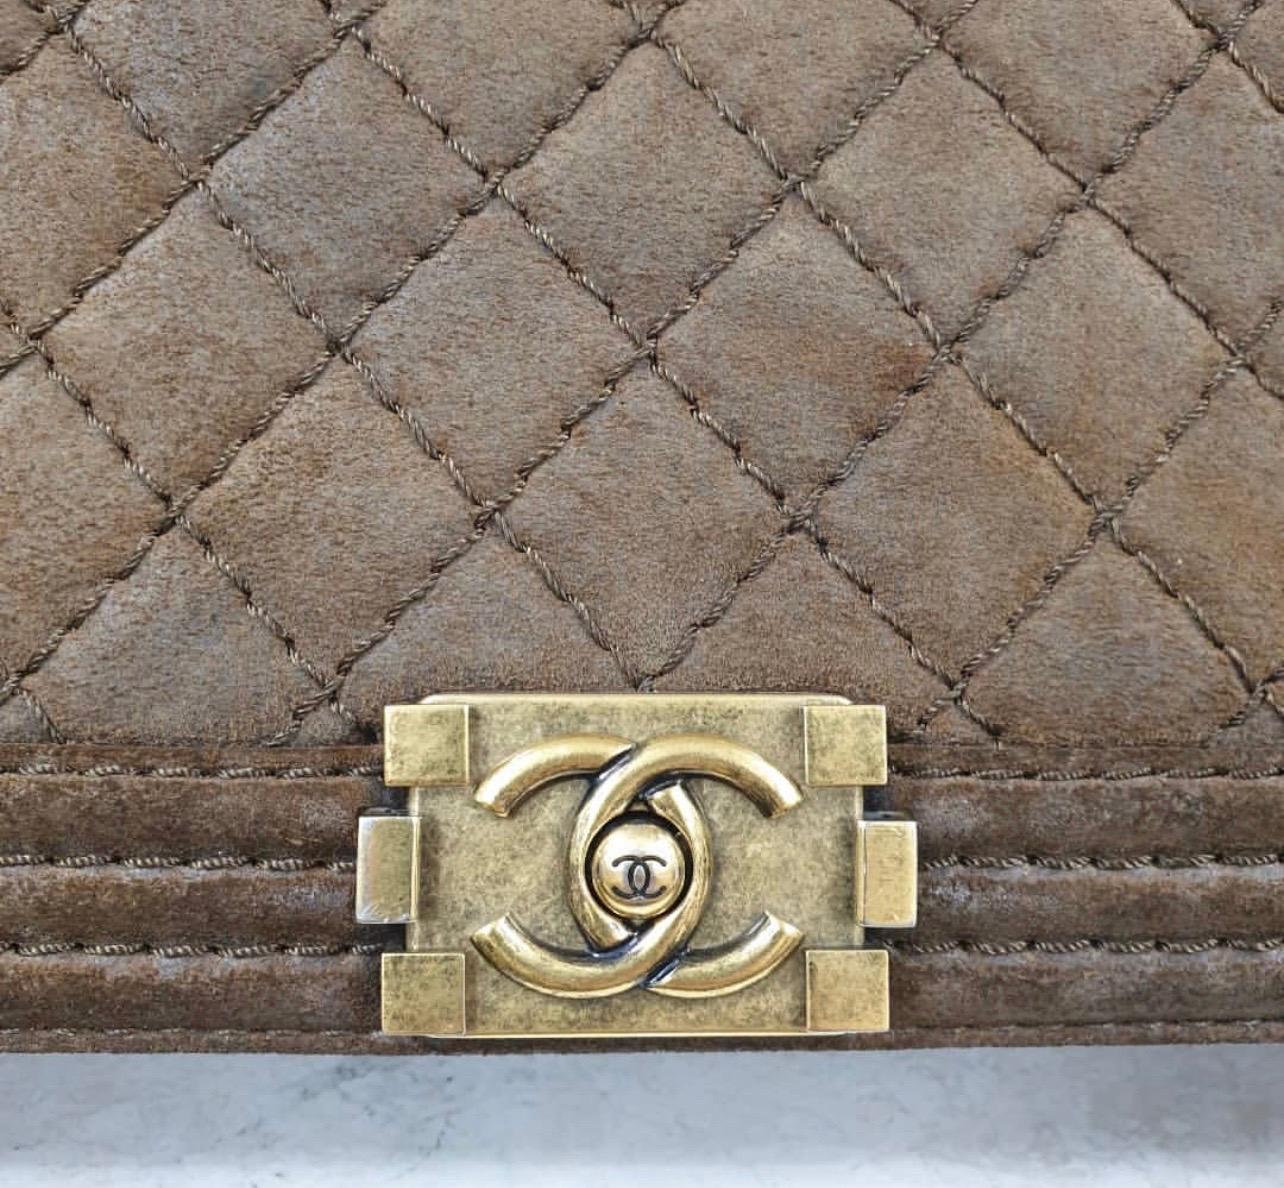 This authentic Chanel Boy Flap Bag Quilted Distressed Suede Large presented in the brand's Pre-Fall 2013 Metiers d'Art Paris Edinburgh Collection is every woman's dream. 
Crafted from khaki brown quilted distressed suede, this popular, enviable Boy